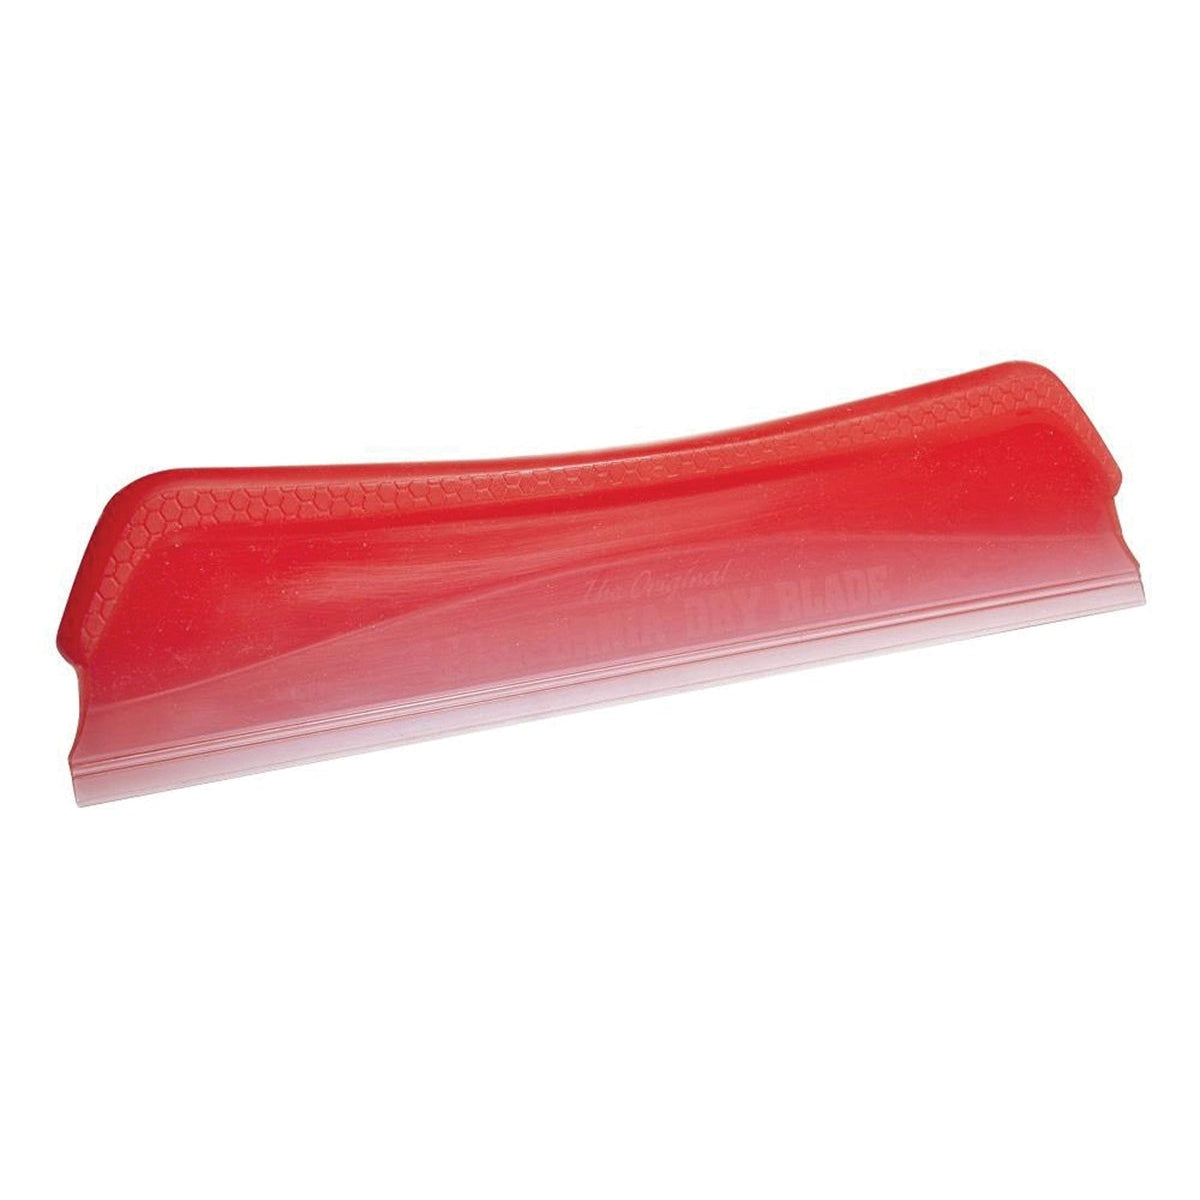 California Car Duster Qualifies for Free Shipping California Car Duster Original California Dry Blade 11" Red #23014